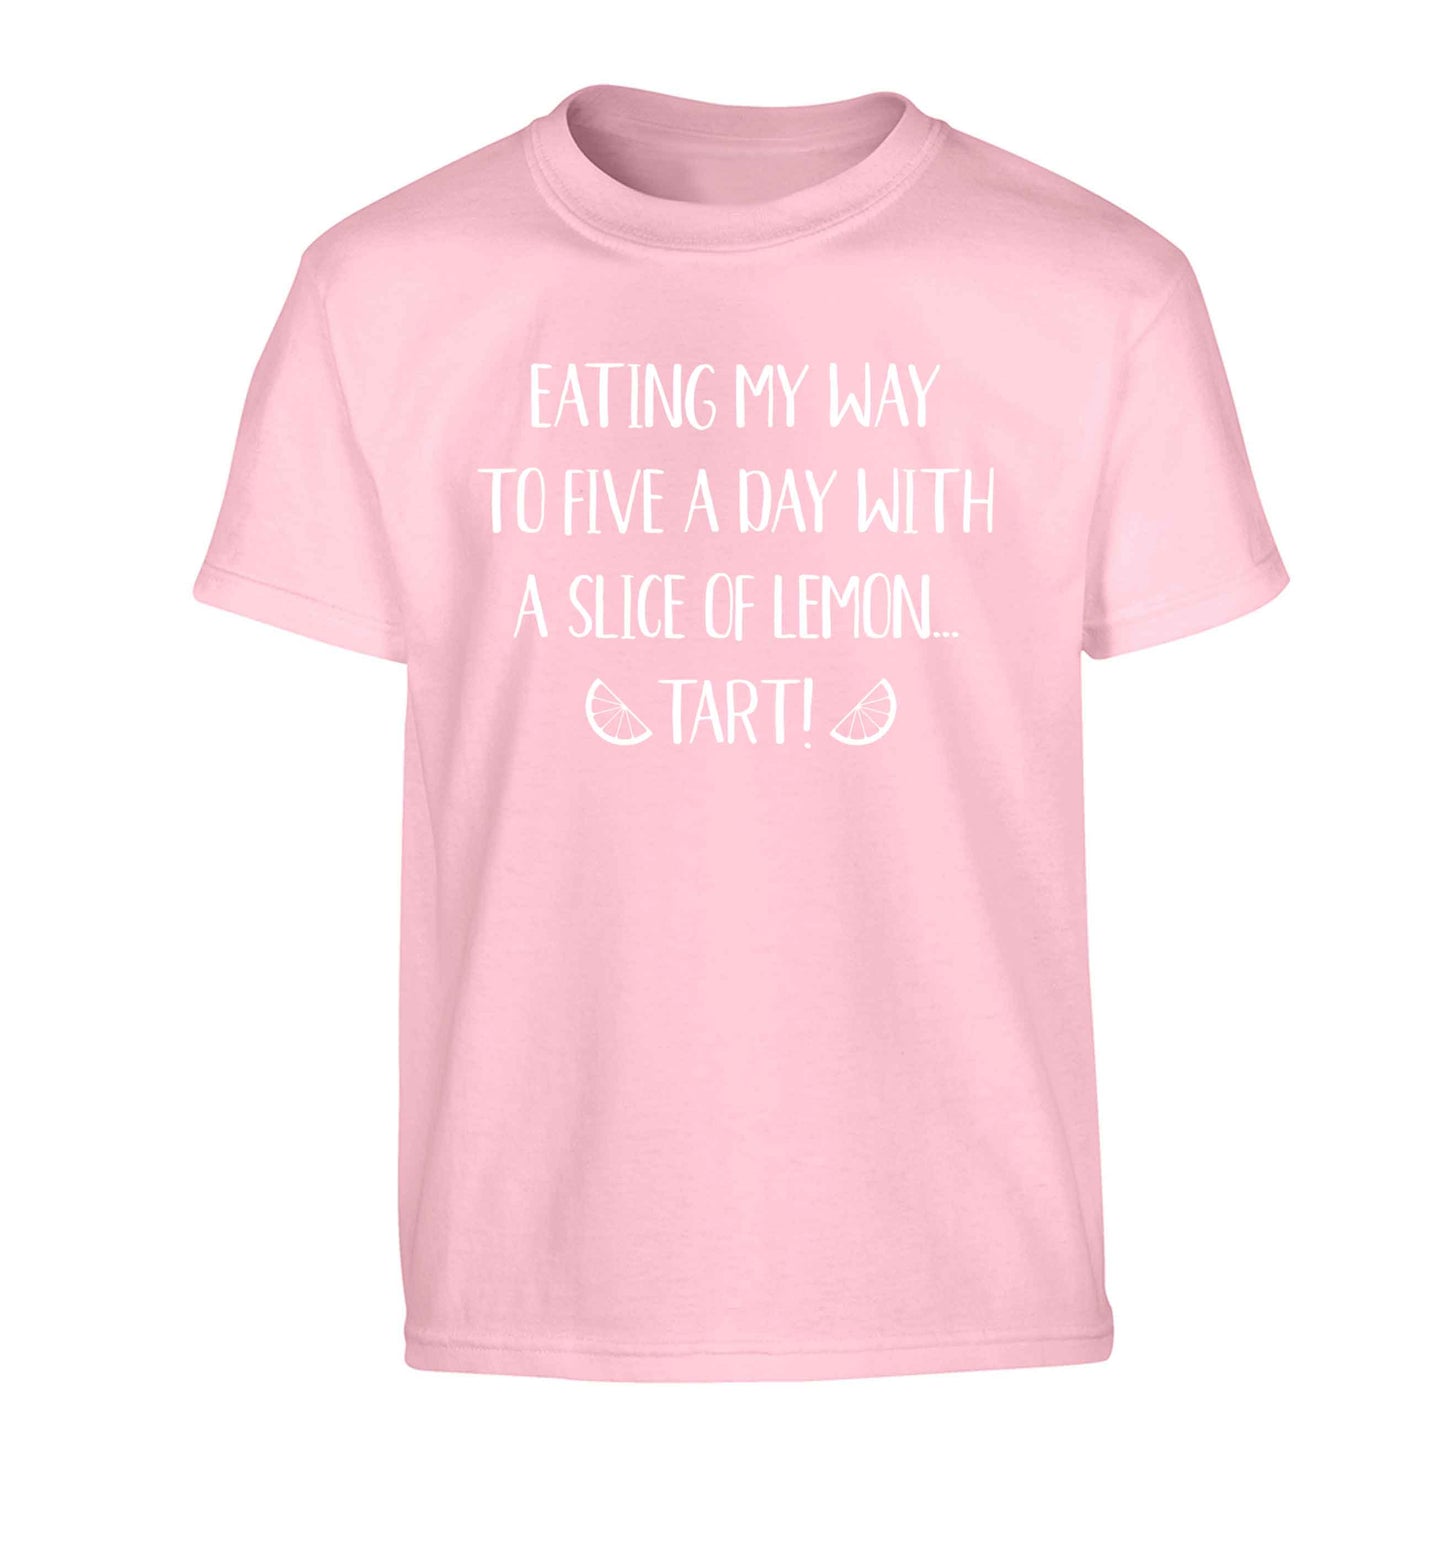 Eating my way to five a day with a slice of lemon tart Children's light pink Tshirt 12-13 Years